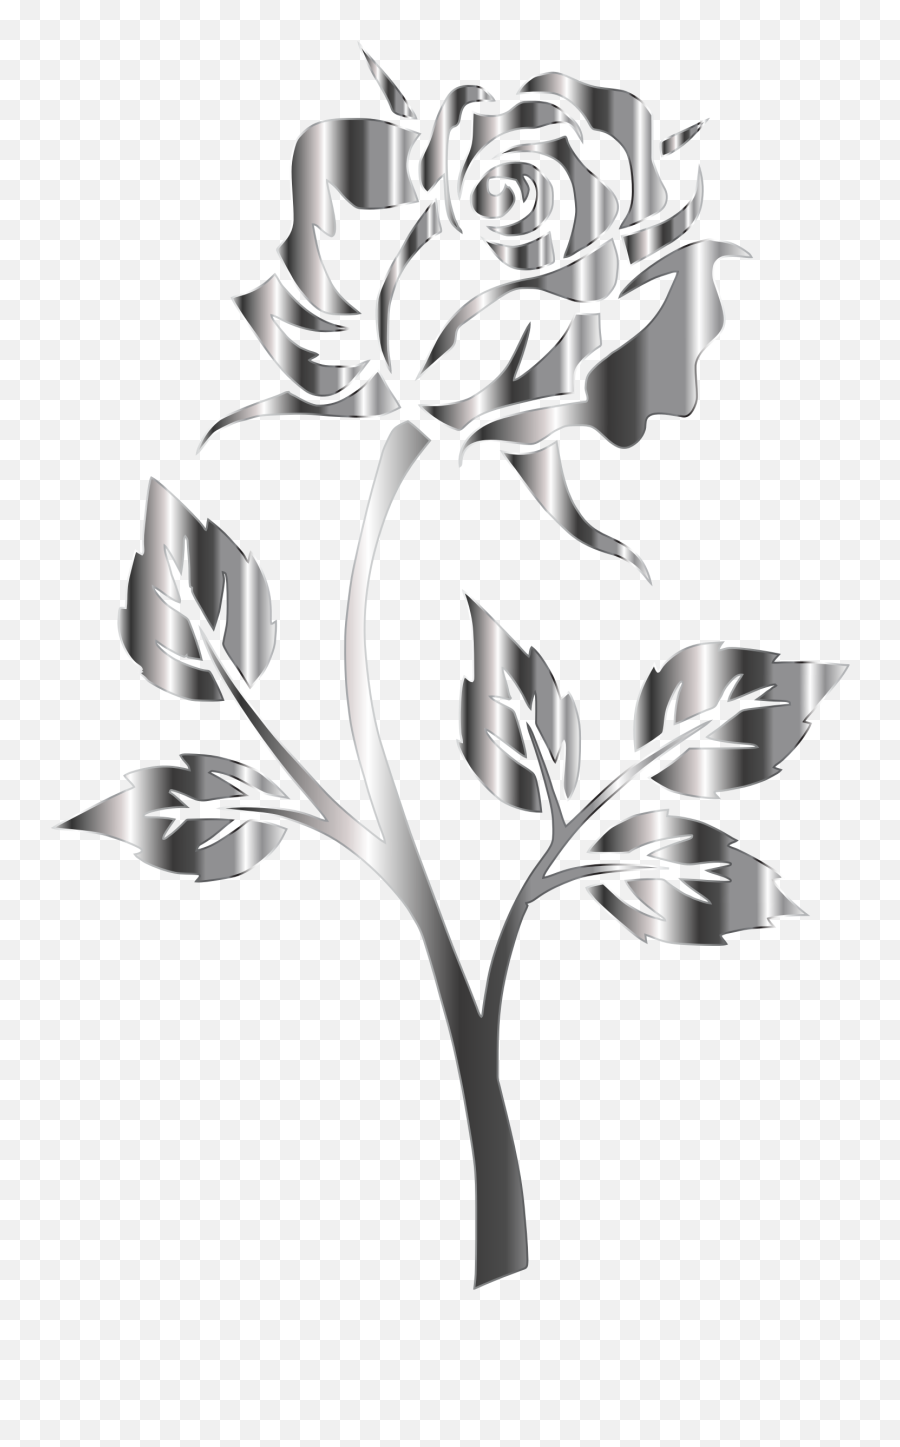 Stainless Steel Rose Silhouette - Rose Silhouette With No Background Png,White Rose Transparent Background